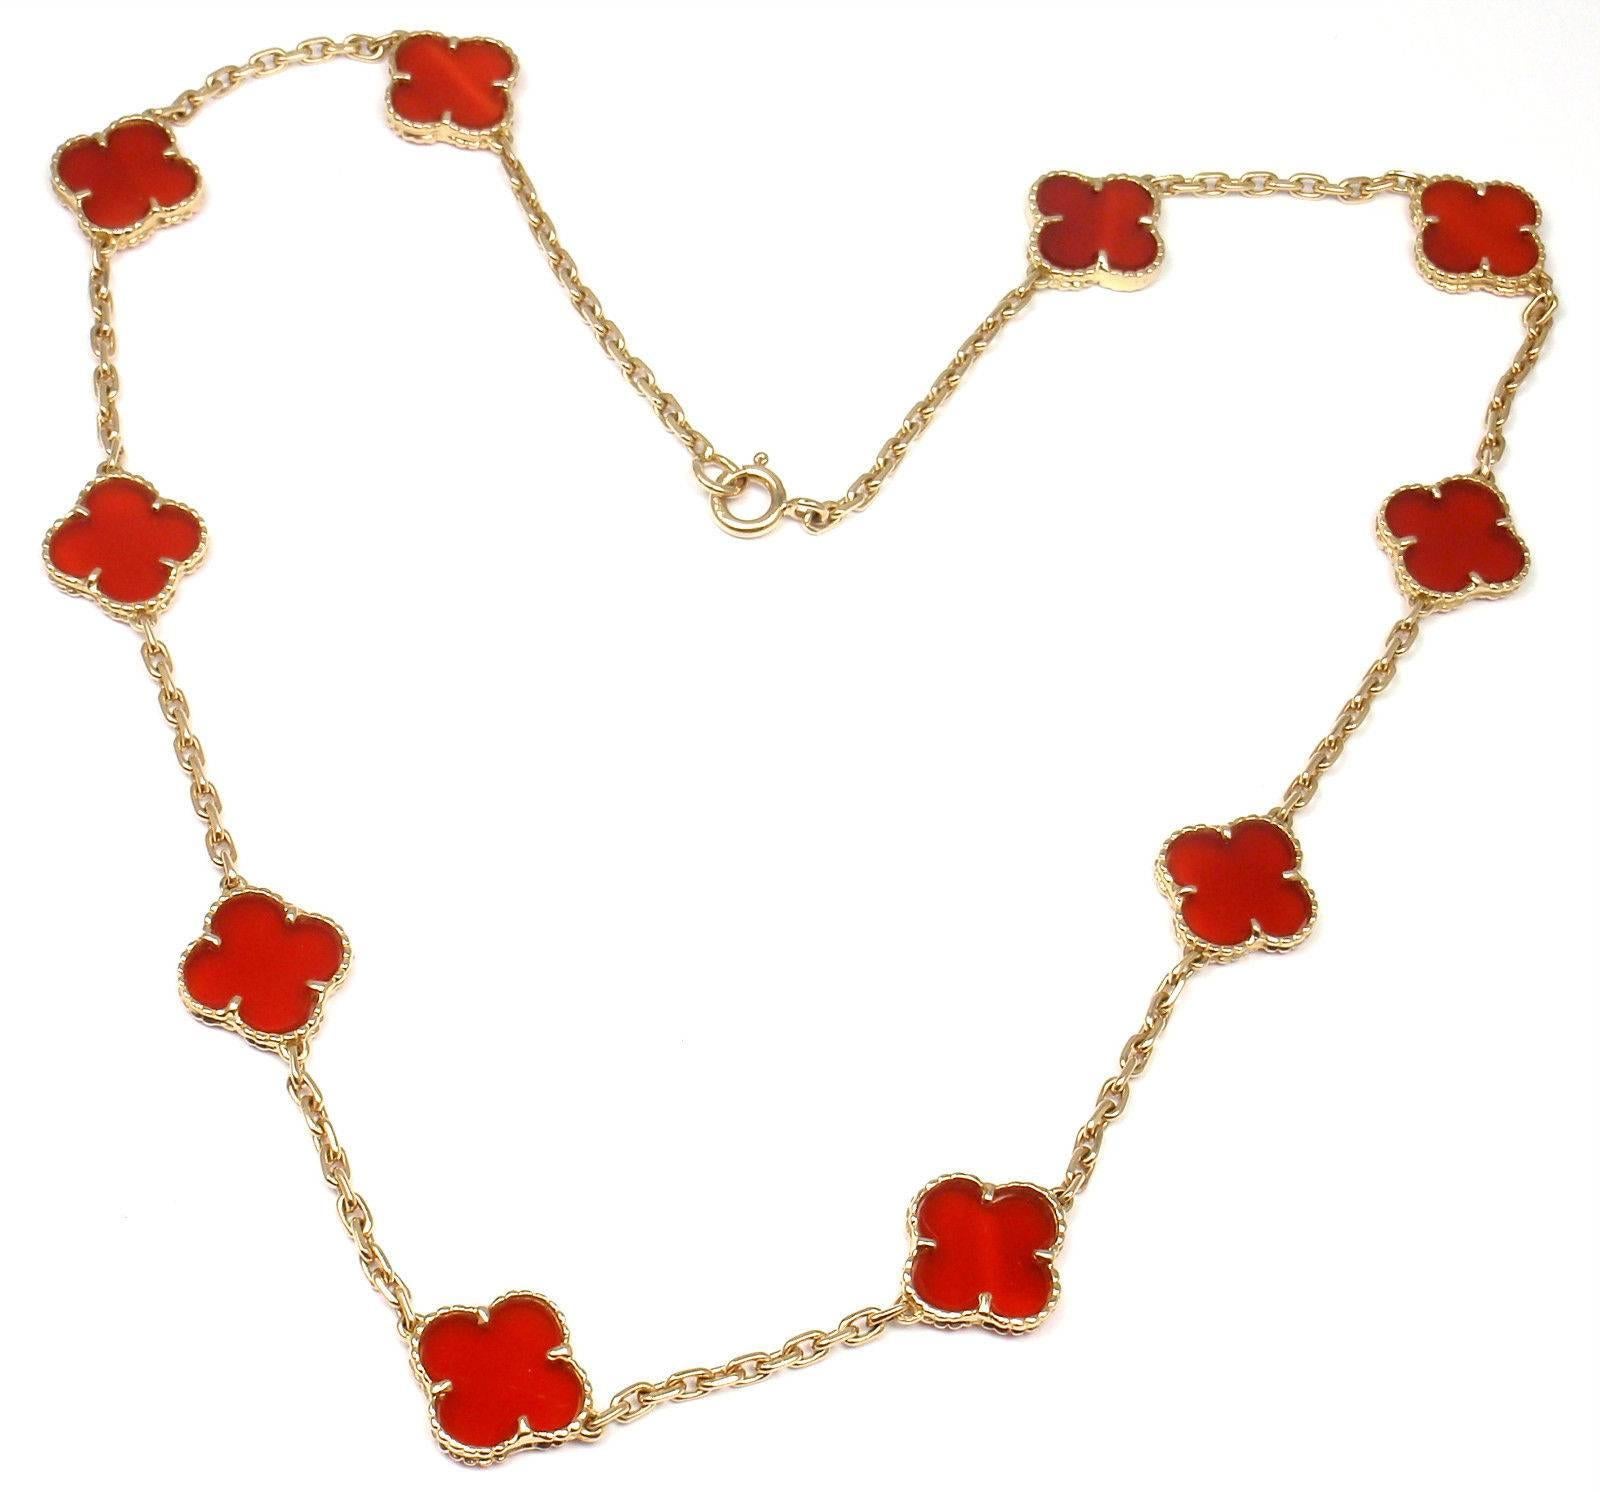 18k Yellow Gold Alhambra 10 Motifs Carnelian Necklace by Van Cleef & Arpels. With 10 motifs of carnelian Alhambra stones 15mm each.  
This necklace comes with service paper from VCA store.
Details: 
Length: 19'' necklace
Width: 15mm
Weight: 22.7